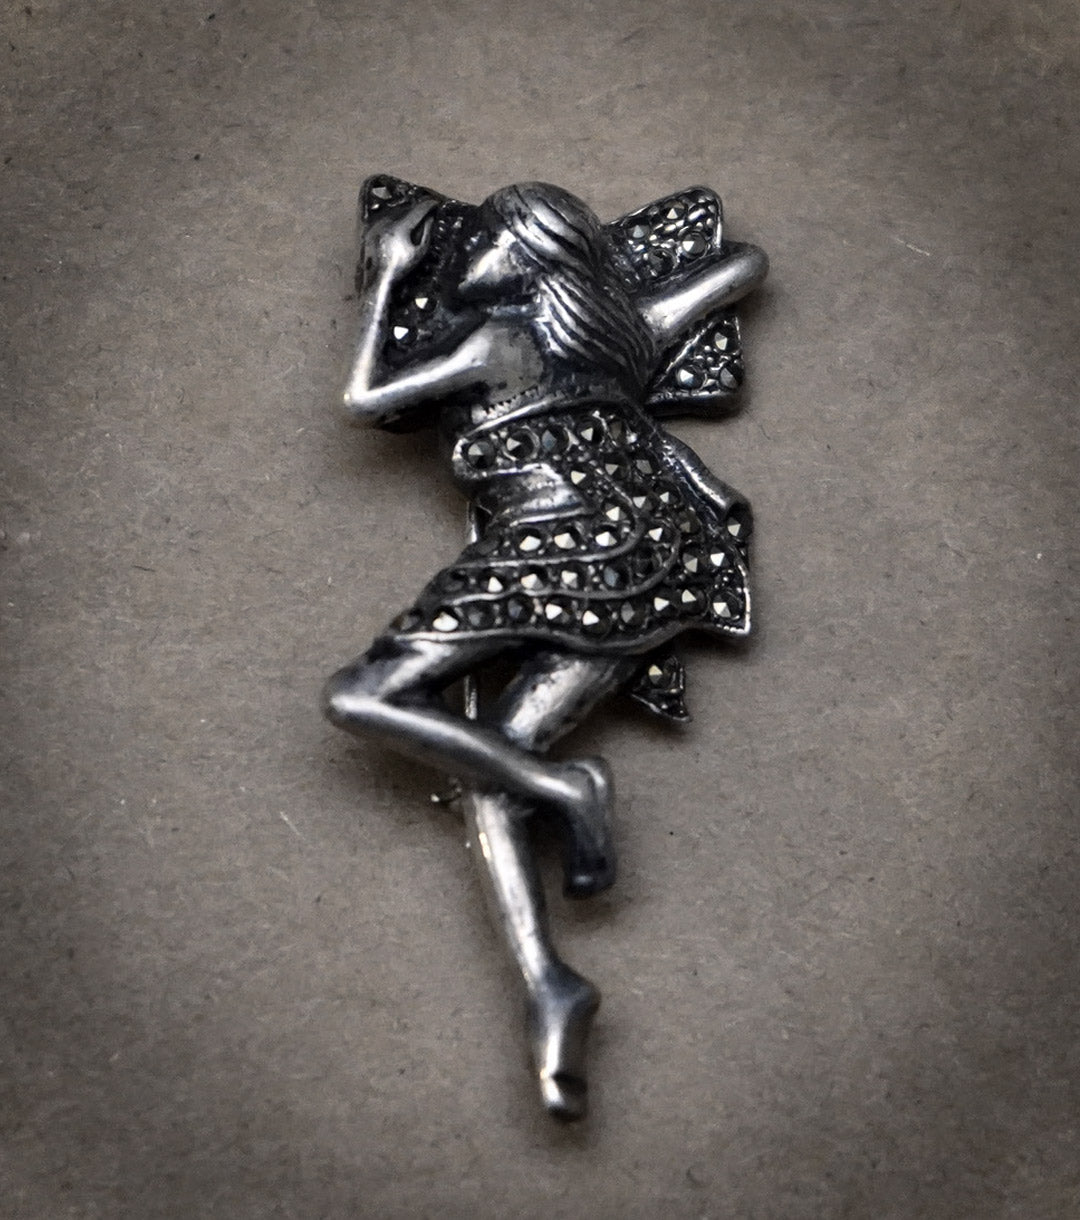 "Sleeping Beauty" 925 Sterling Silver and Marcasite Brooch